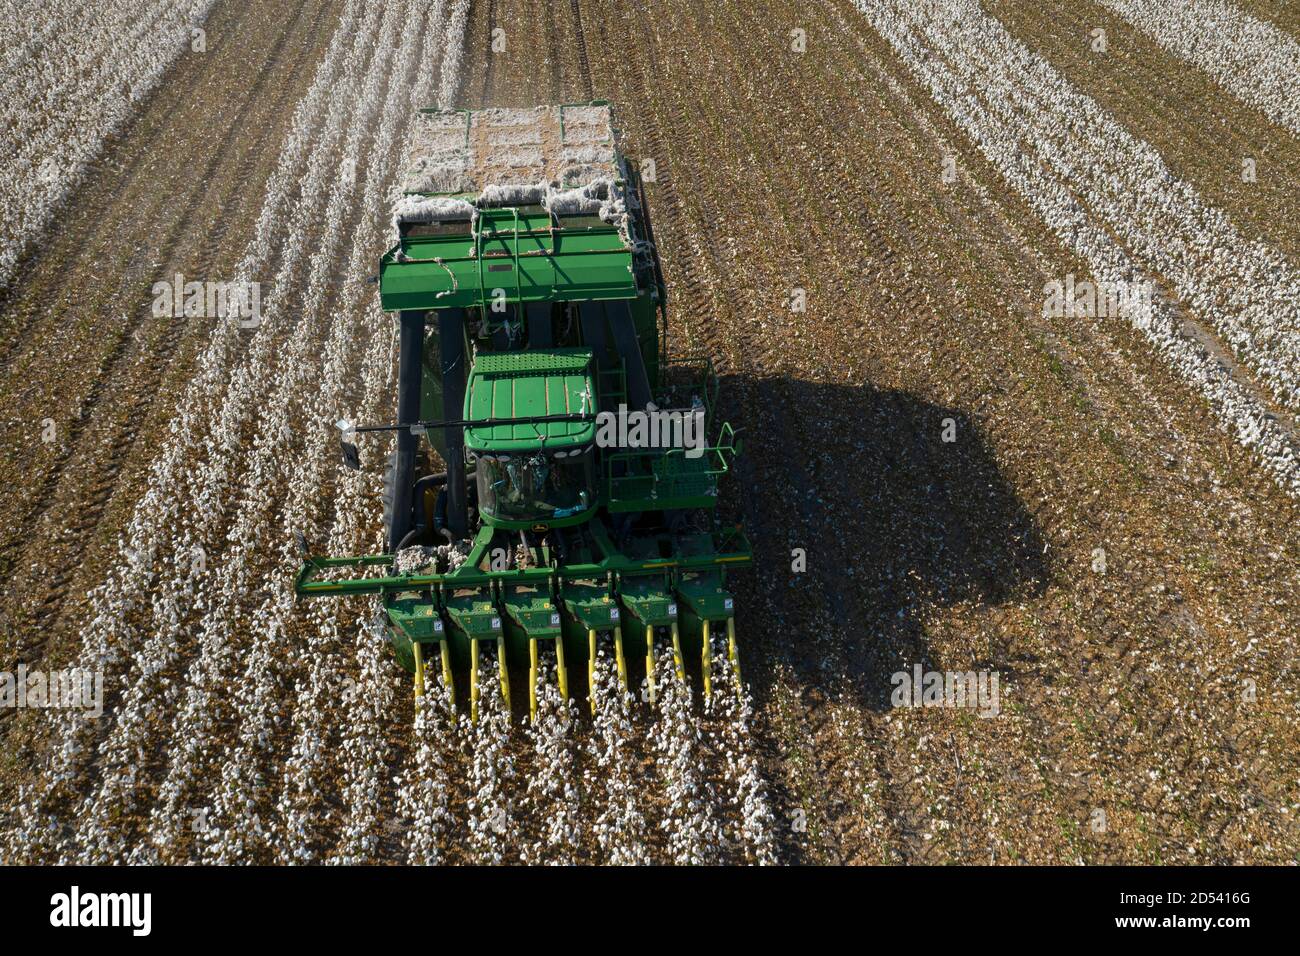 Operations Manager Brandon Schirmer operates a speciality cotton picking harvester at his family farm during the cotton harvest August 24, 2020 in Batesville, Texas. Stock Photo